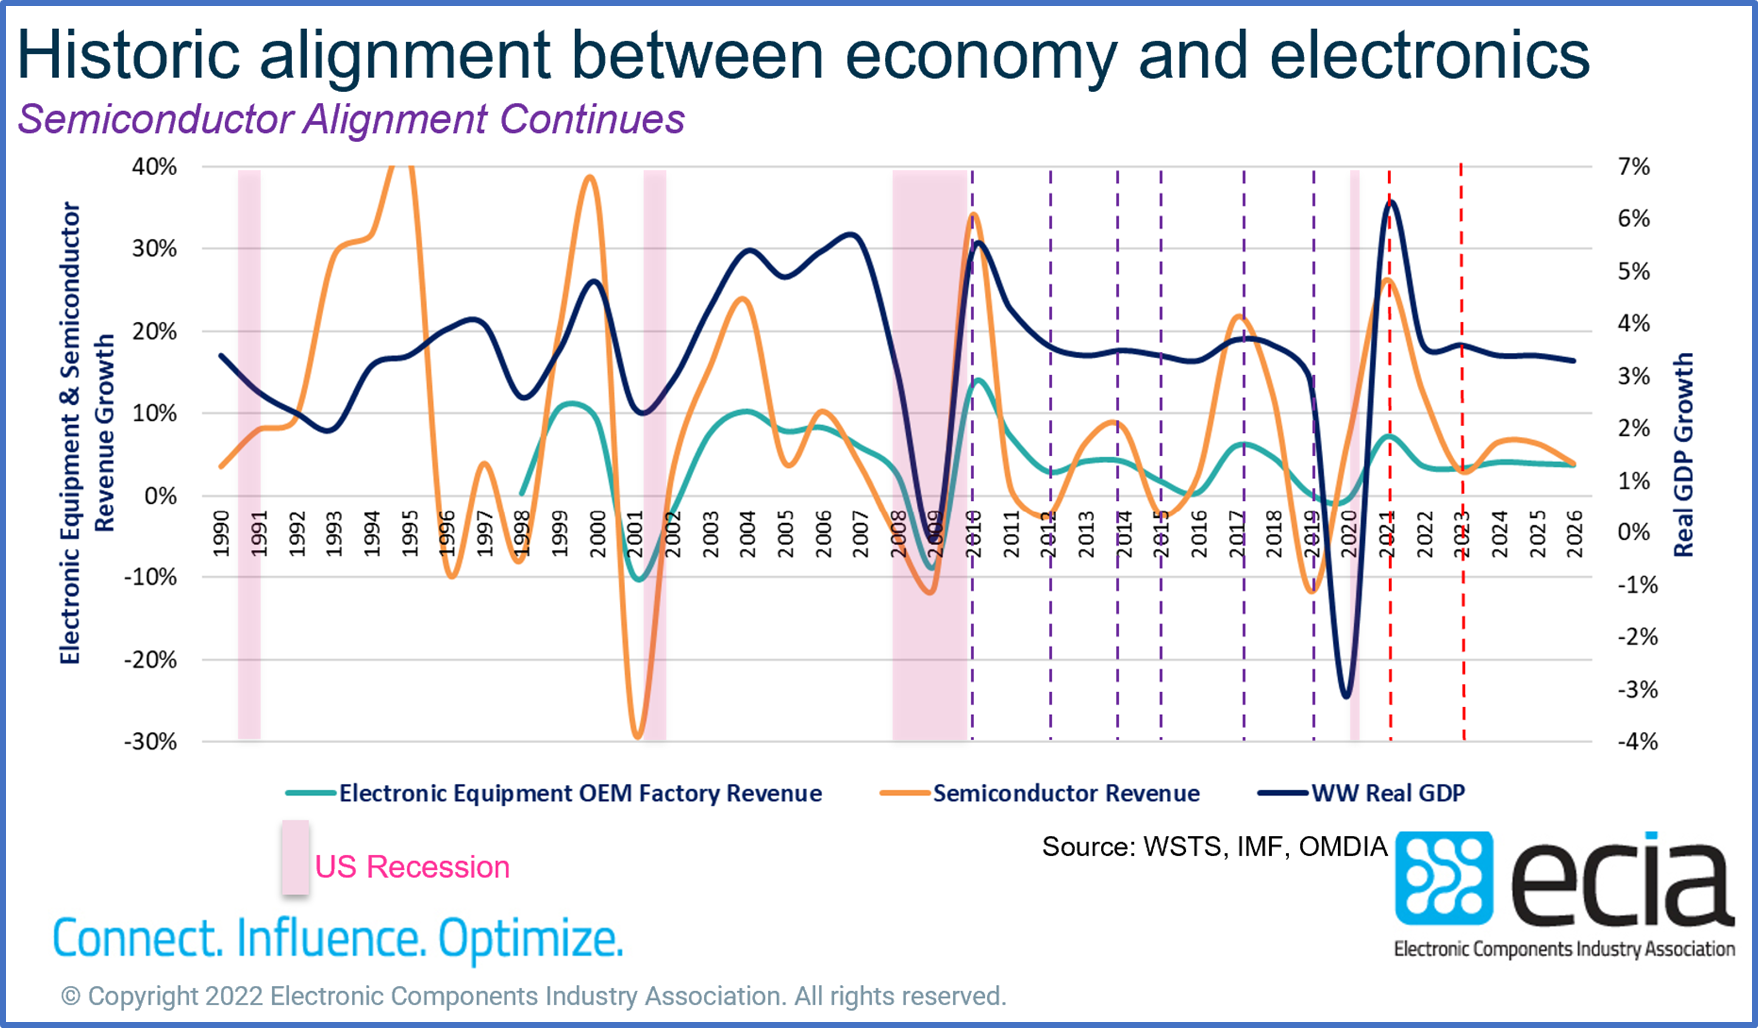 Historical alignment between economy and electronics. Source: ECIA